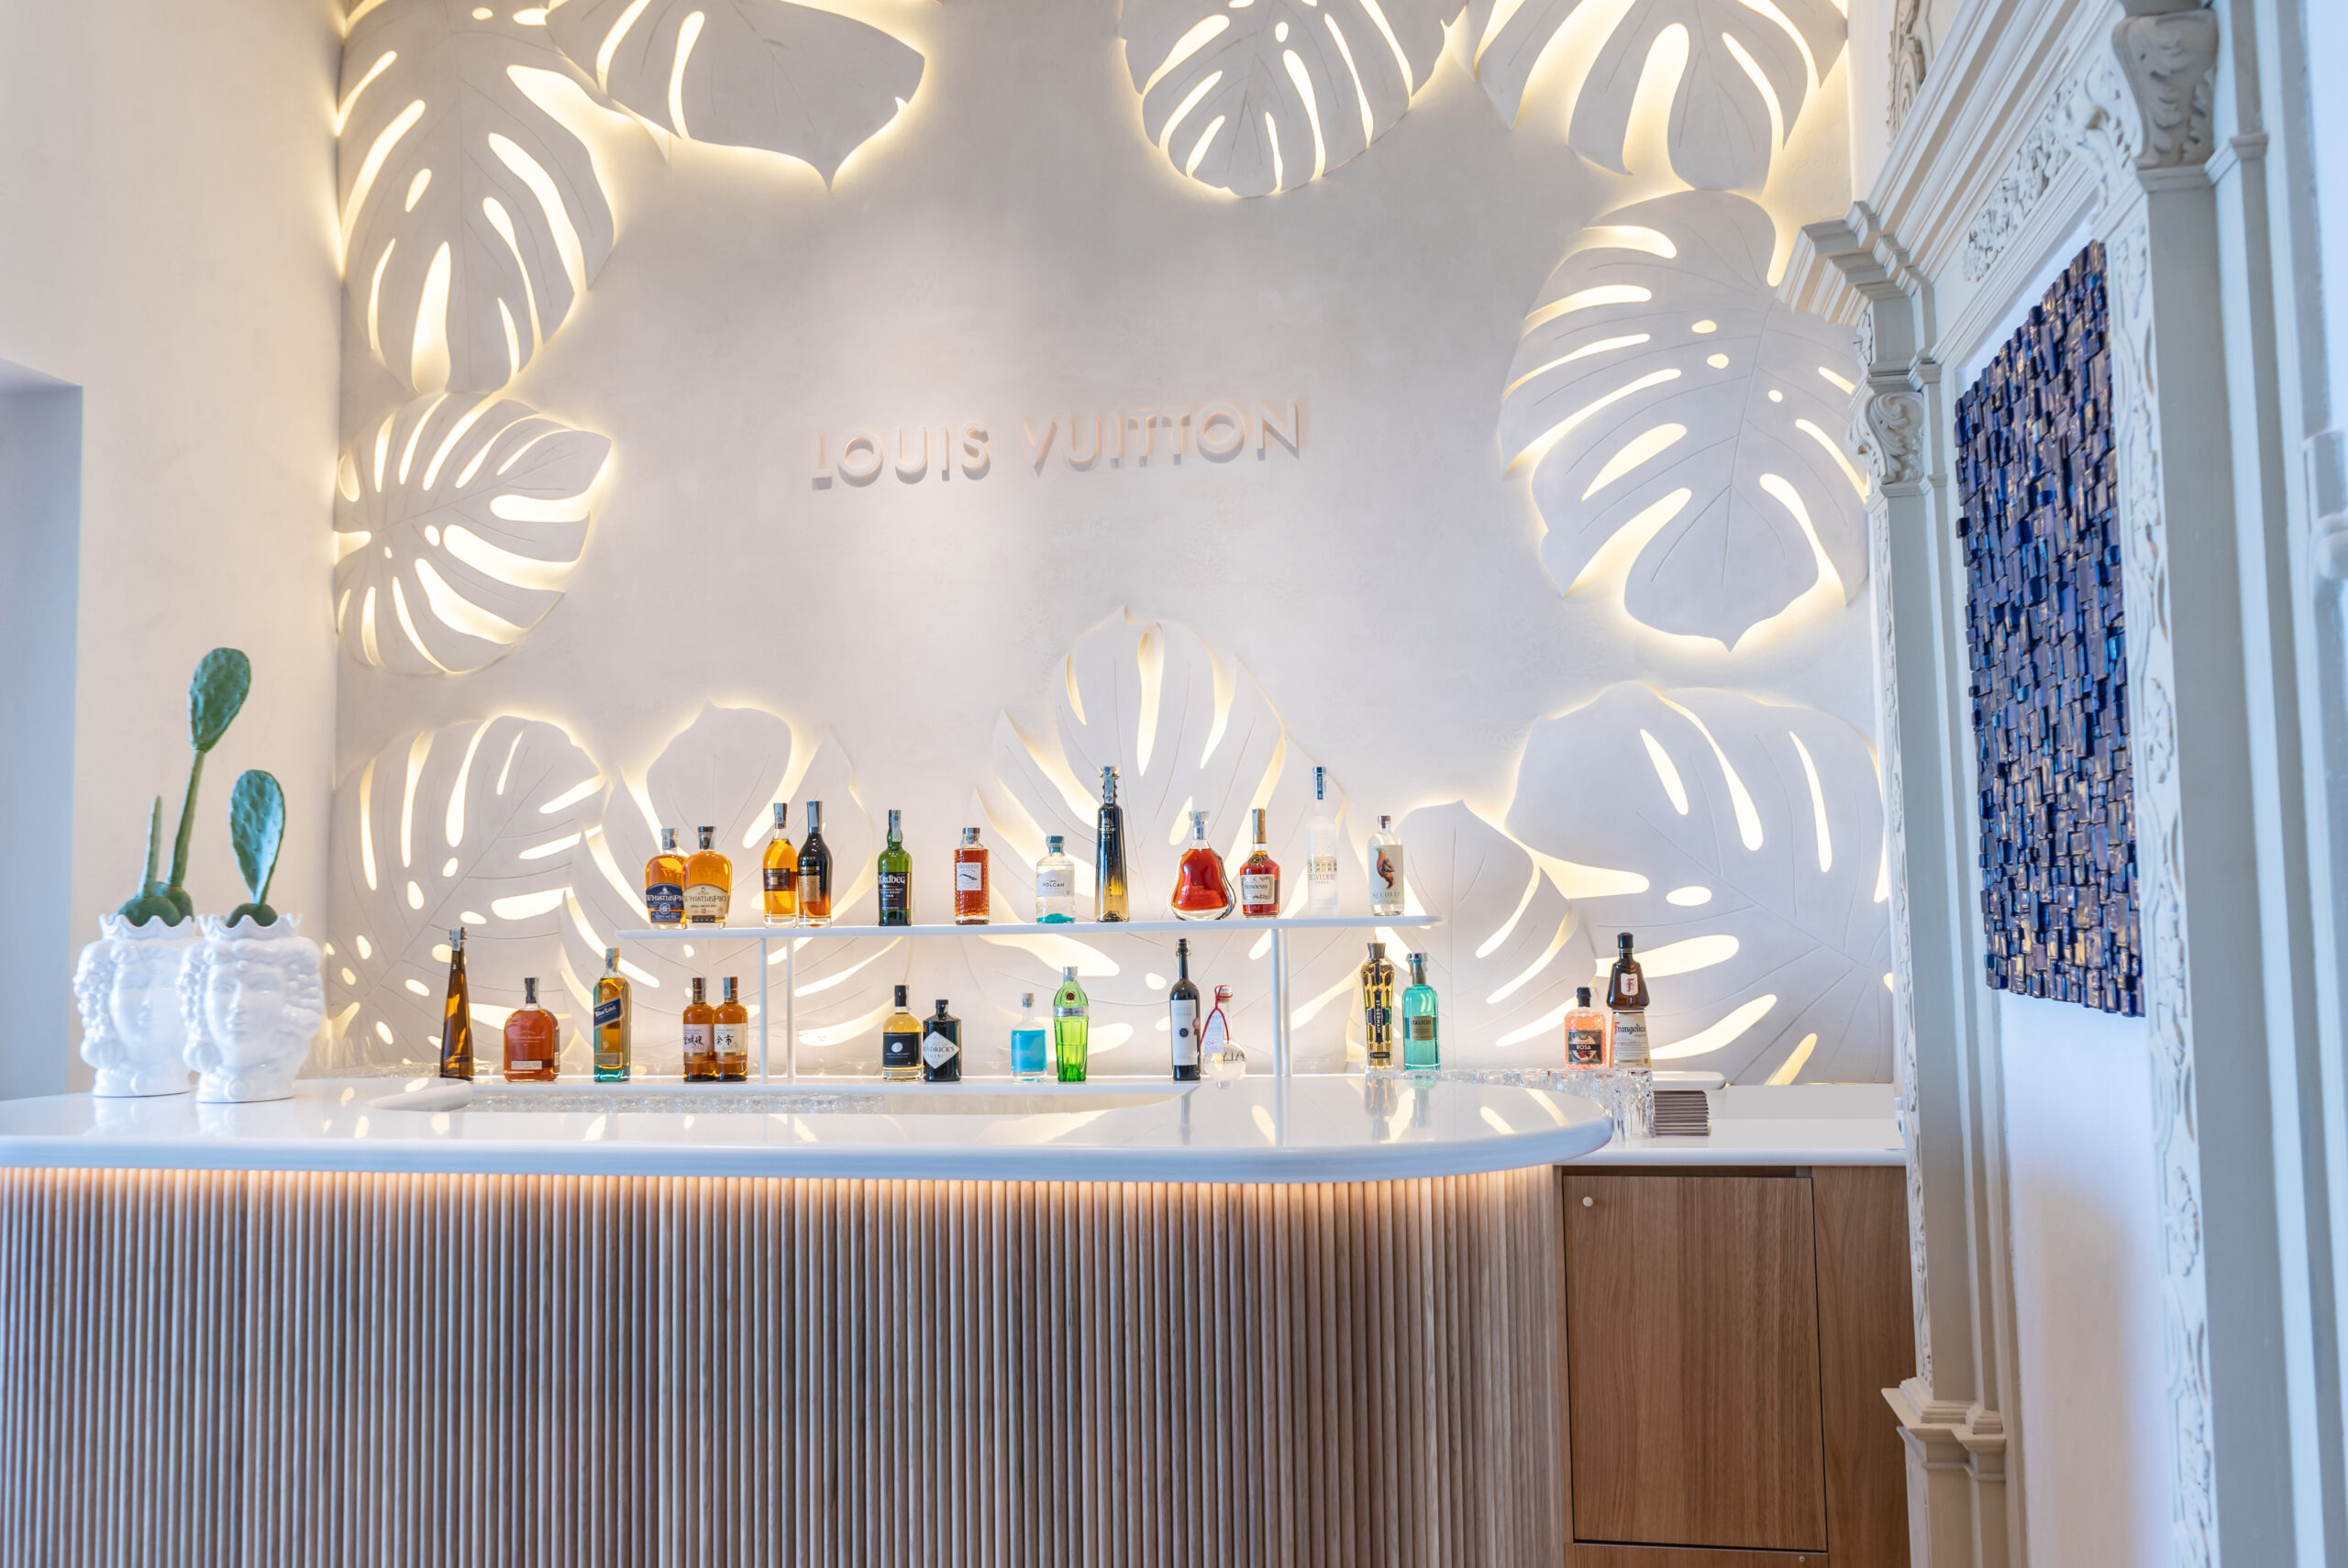 The first Louis Vuitton Café by Timeo and new resort store in